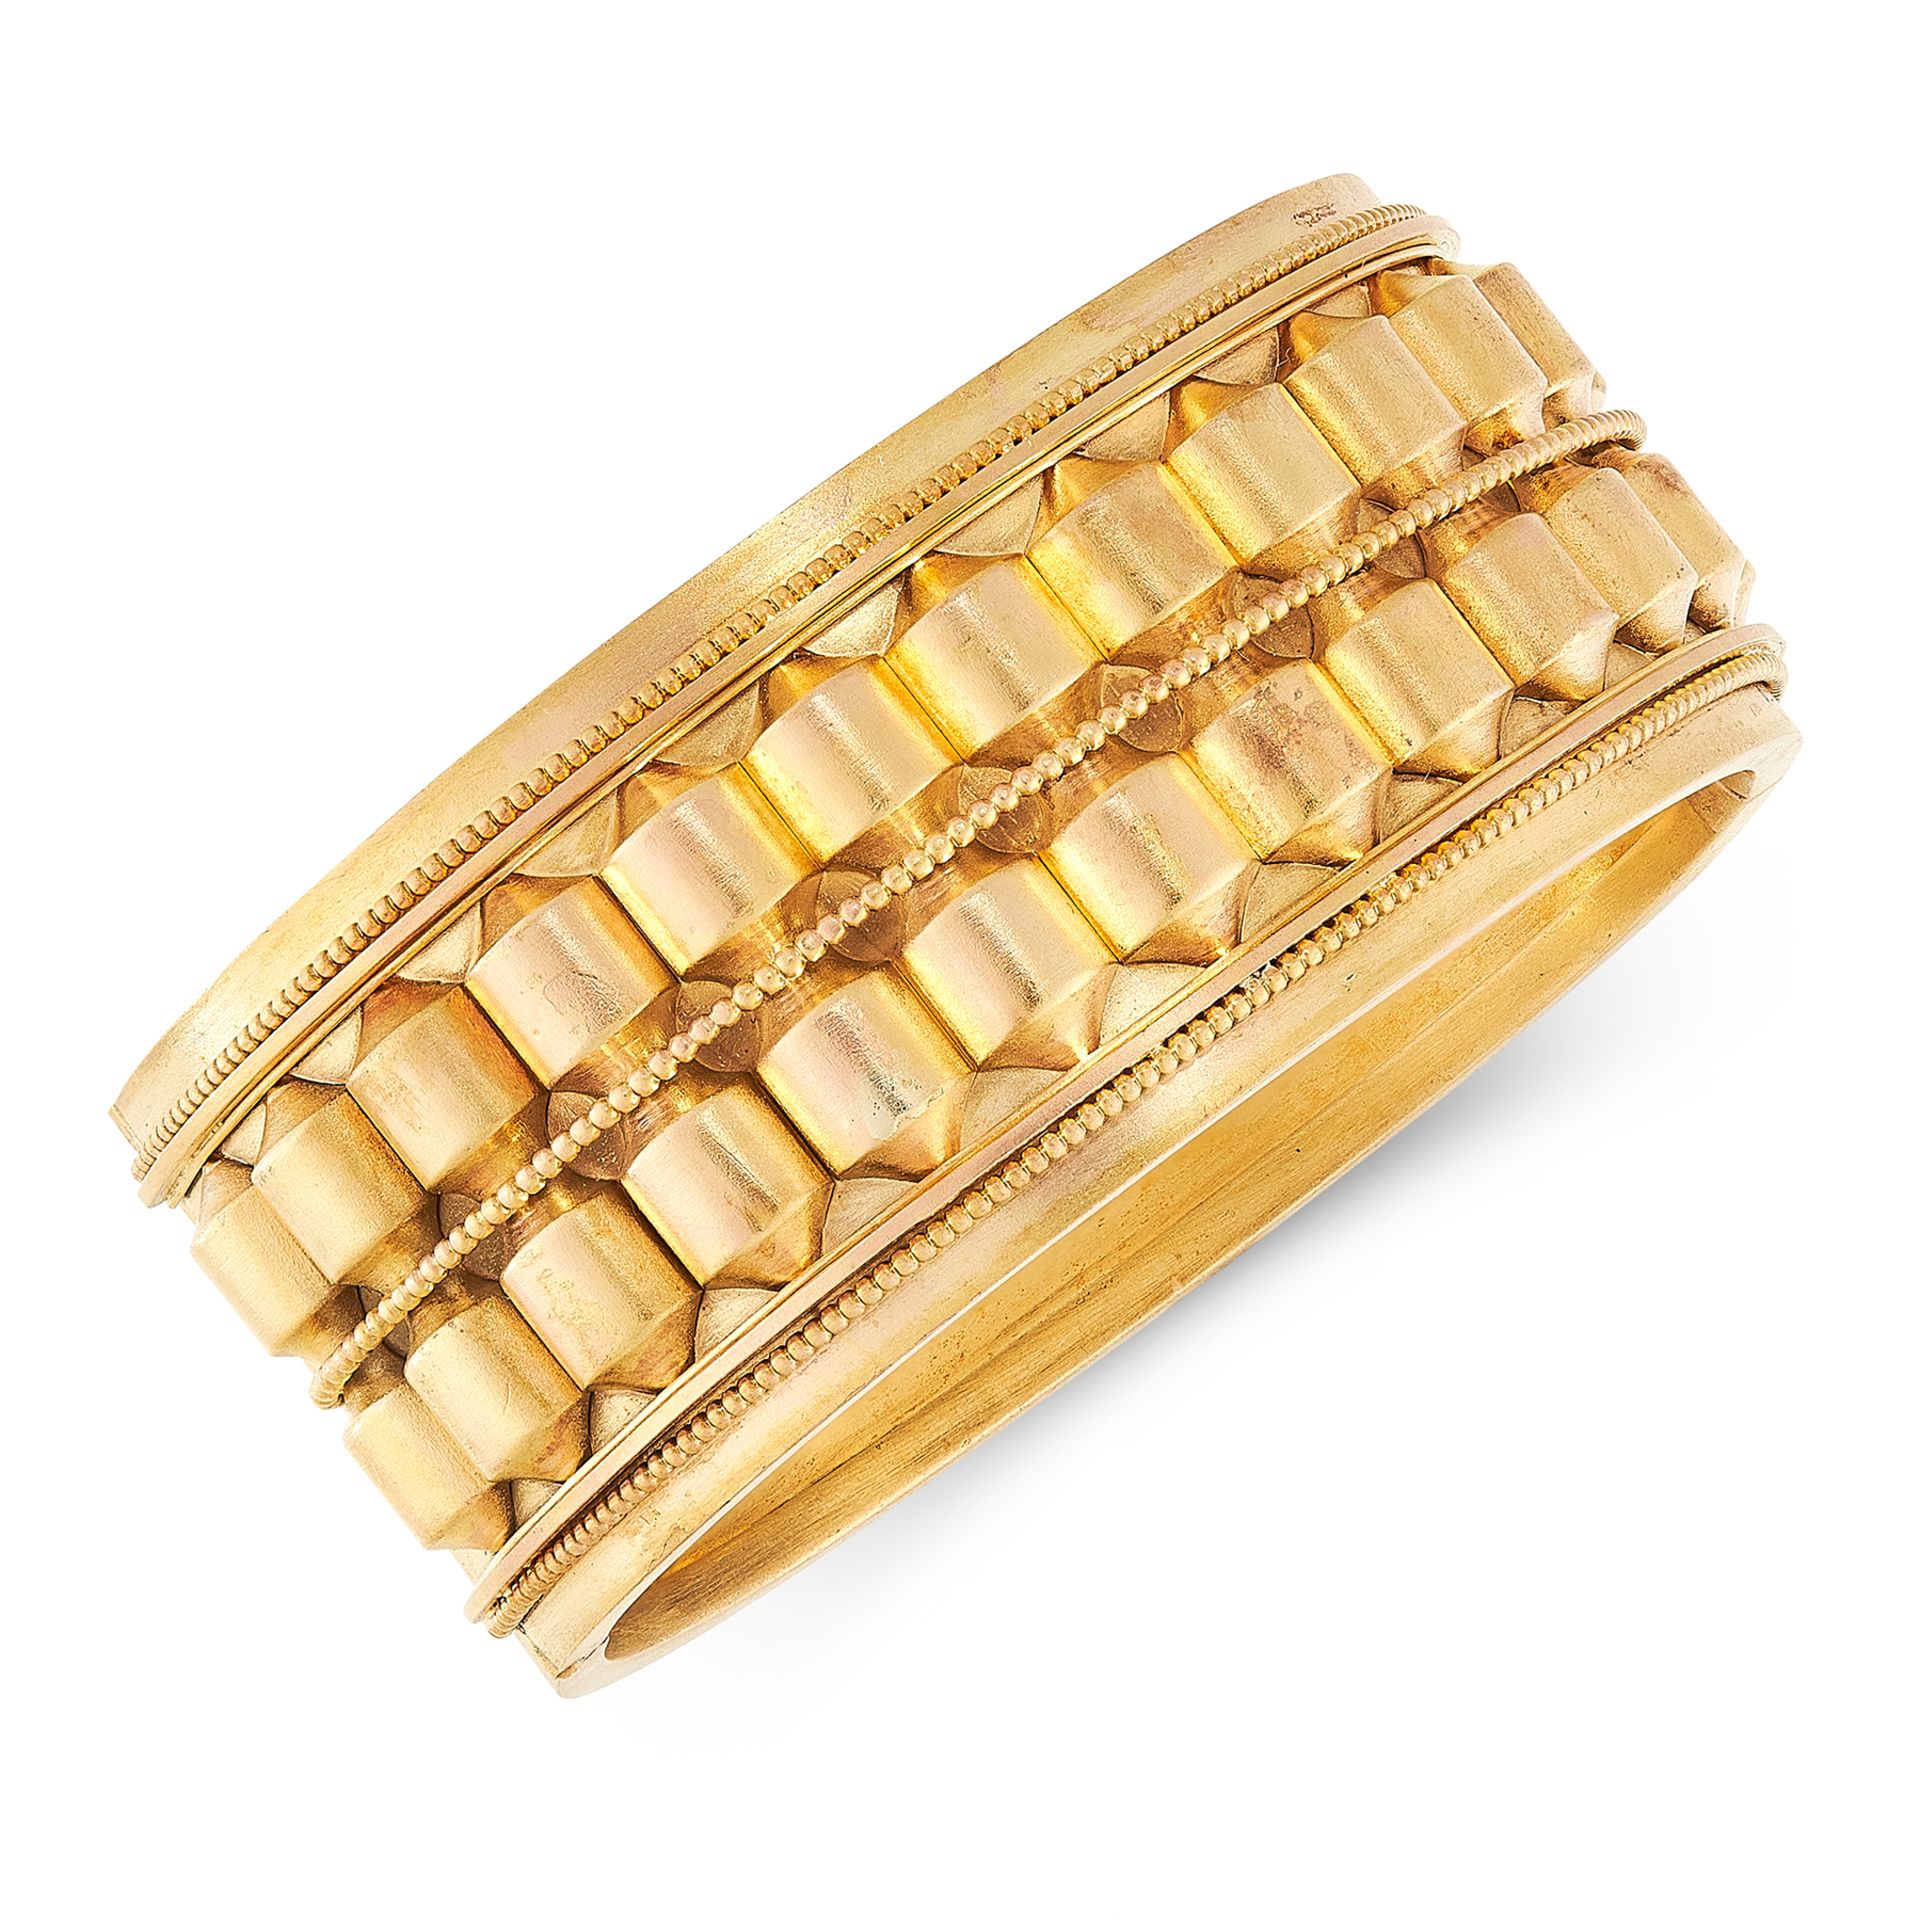 AN ANTIQUE CUFF BANGLE in high carat yellow gold, the body decorated to one side with barrel